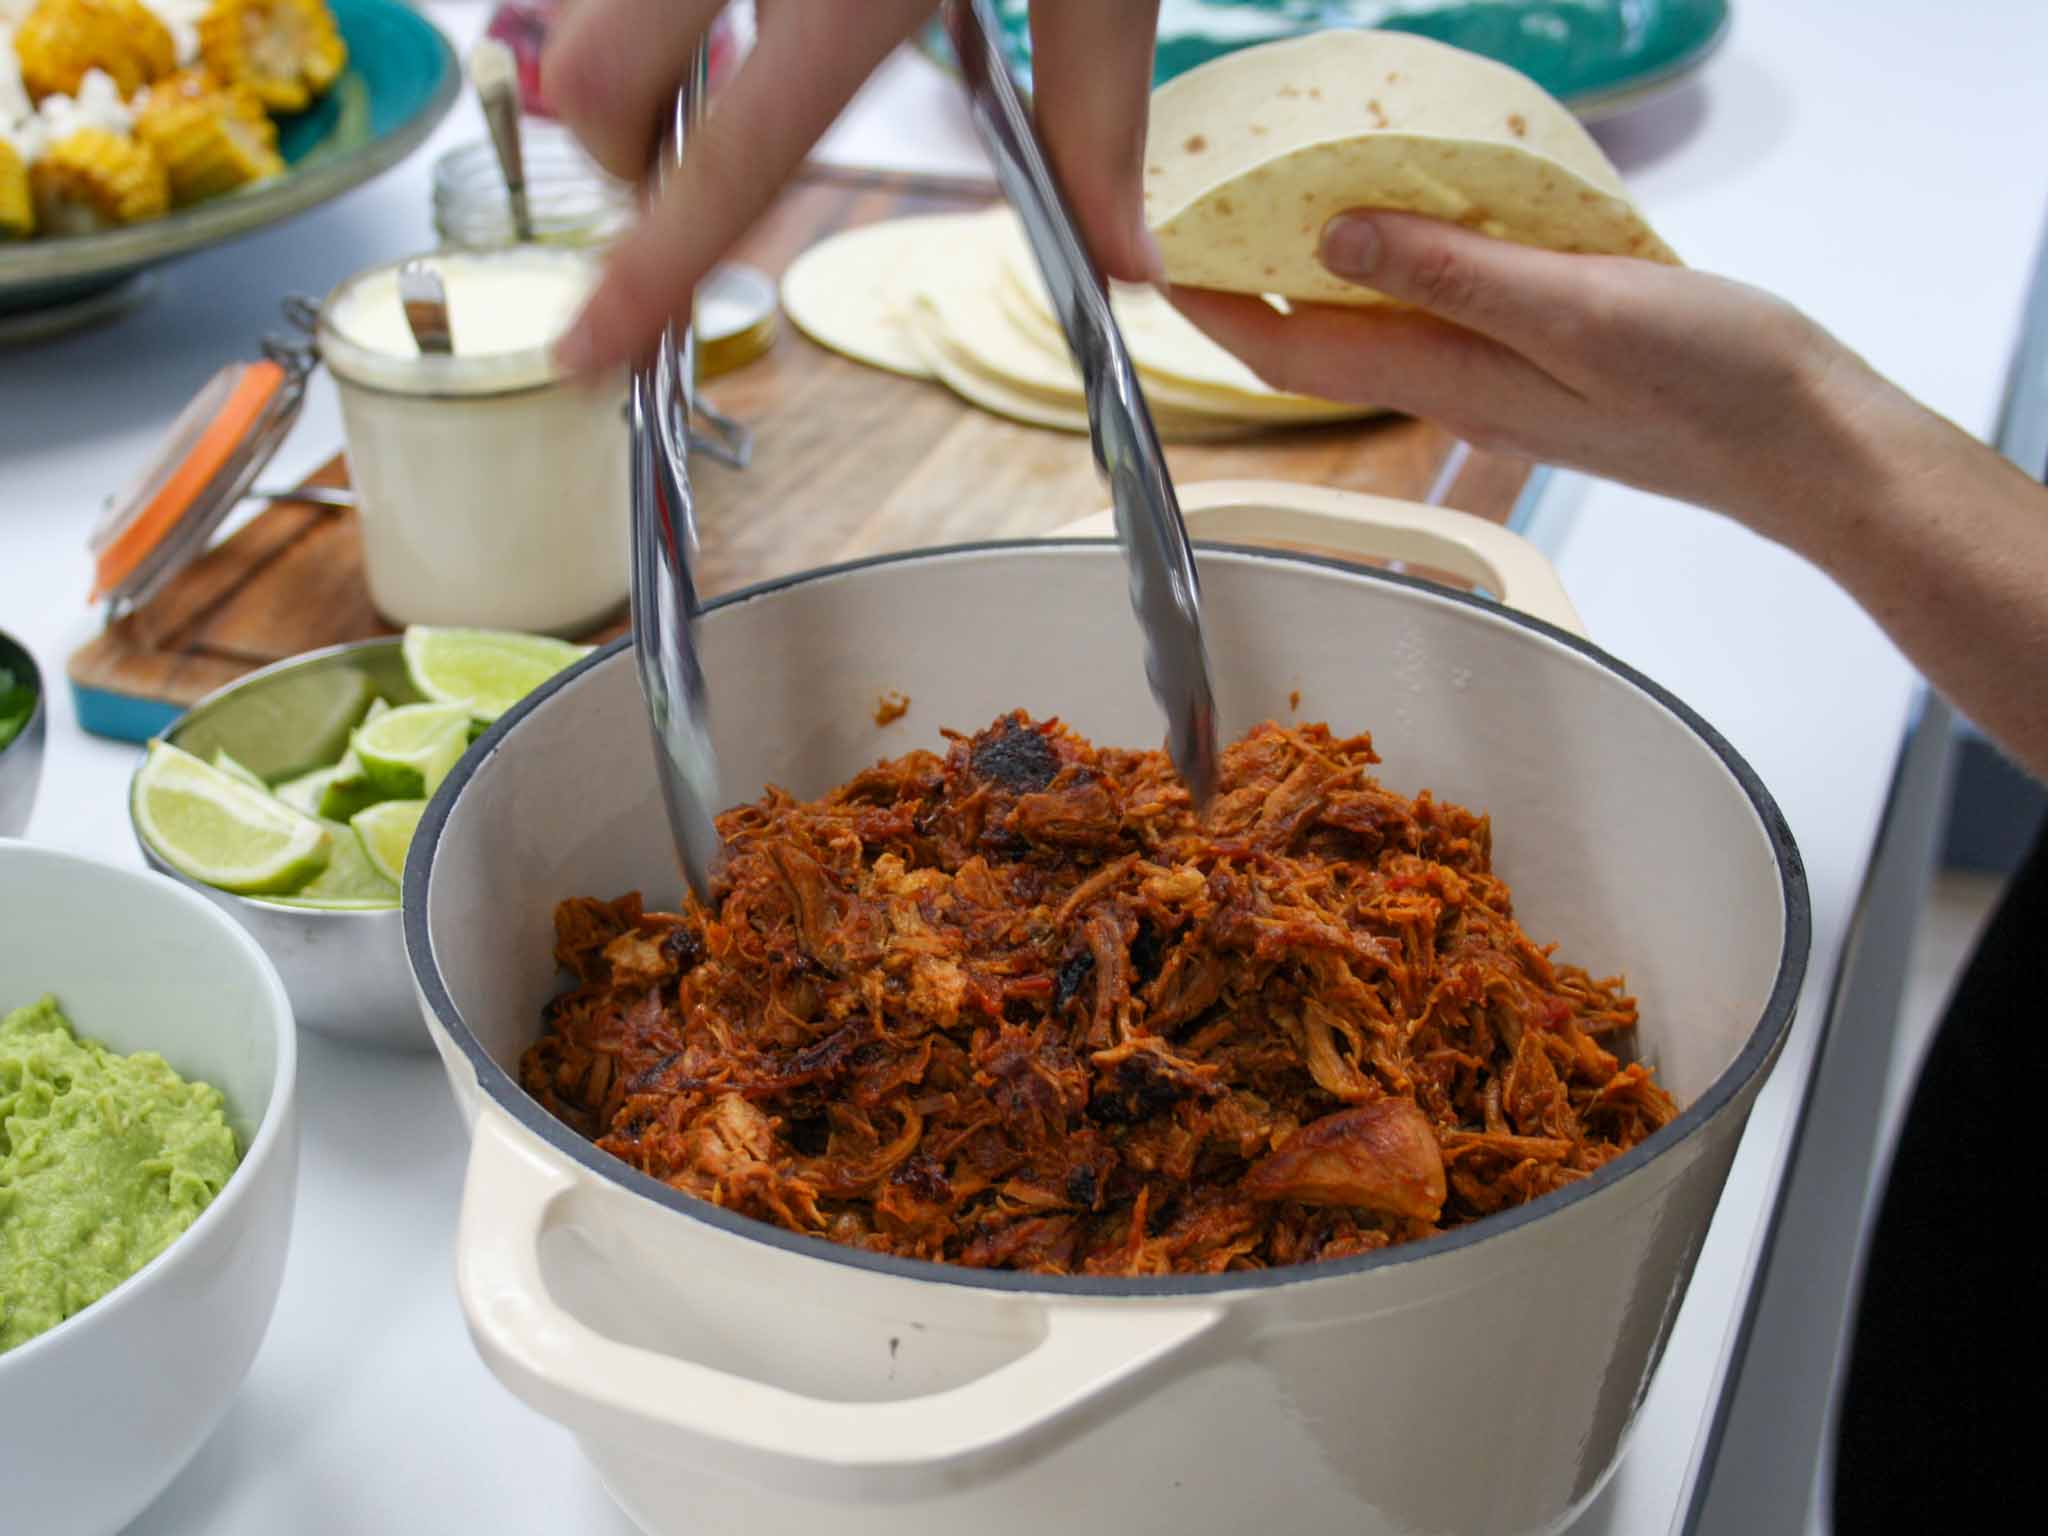 Close up of pot of pulled pork with tongs reaching in. Limes, tortillas, guacamole and sour cream in background.